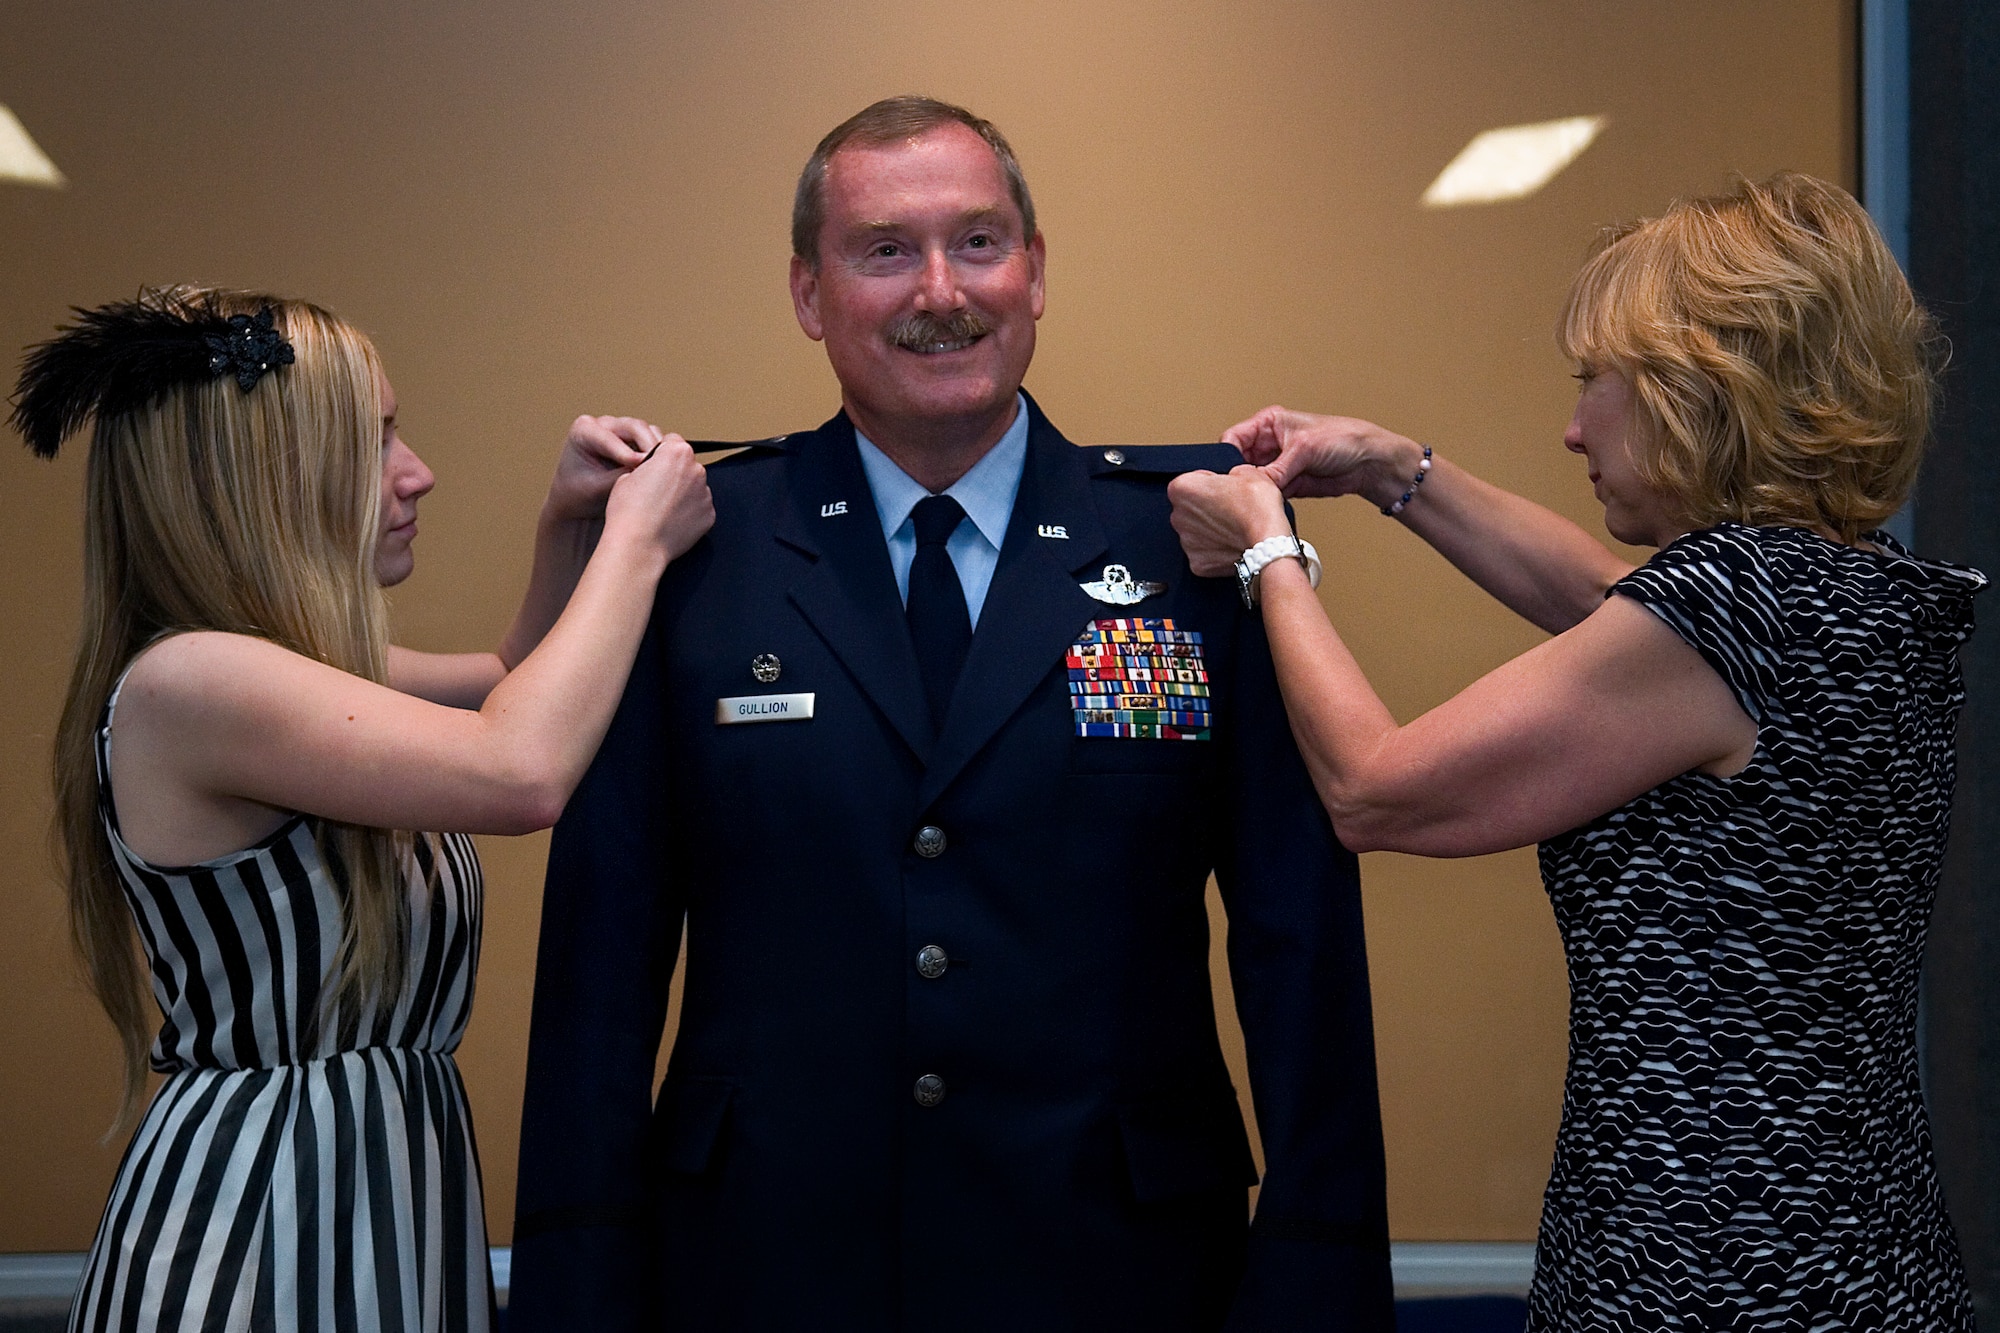 Col. Douglas Gullion, 434 Operations Support Squadron commander, has his wife, Pam, right, and daughter, Haleigh, left, pin eagle rank insignias on his service dress coat during a during a pin-on ceremony at Grissom Air Reserve Base, Ind., Sept. 7, 2014. Gullion is expected to assume the new role as commander of the 507th Operations Group, Tinker Air Force Base, Okla. Nov. 2, 2014. (U.S. Air Force photo/Senior Airman Jami Lancette)